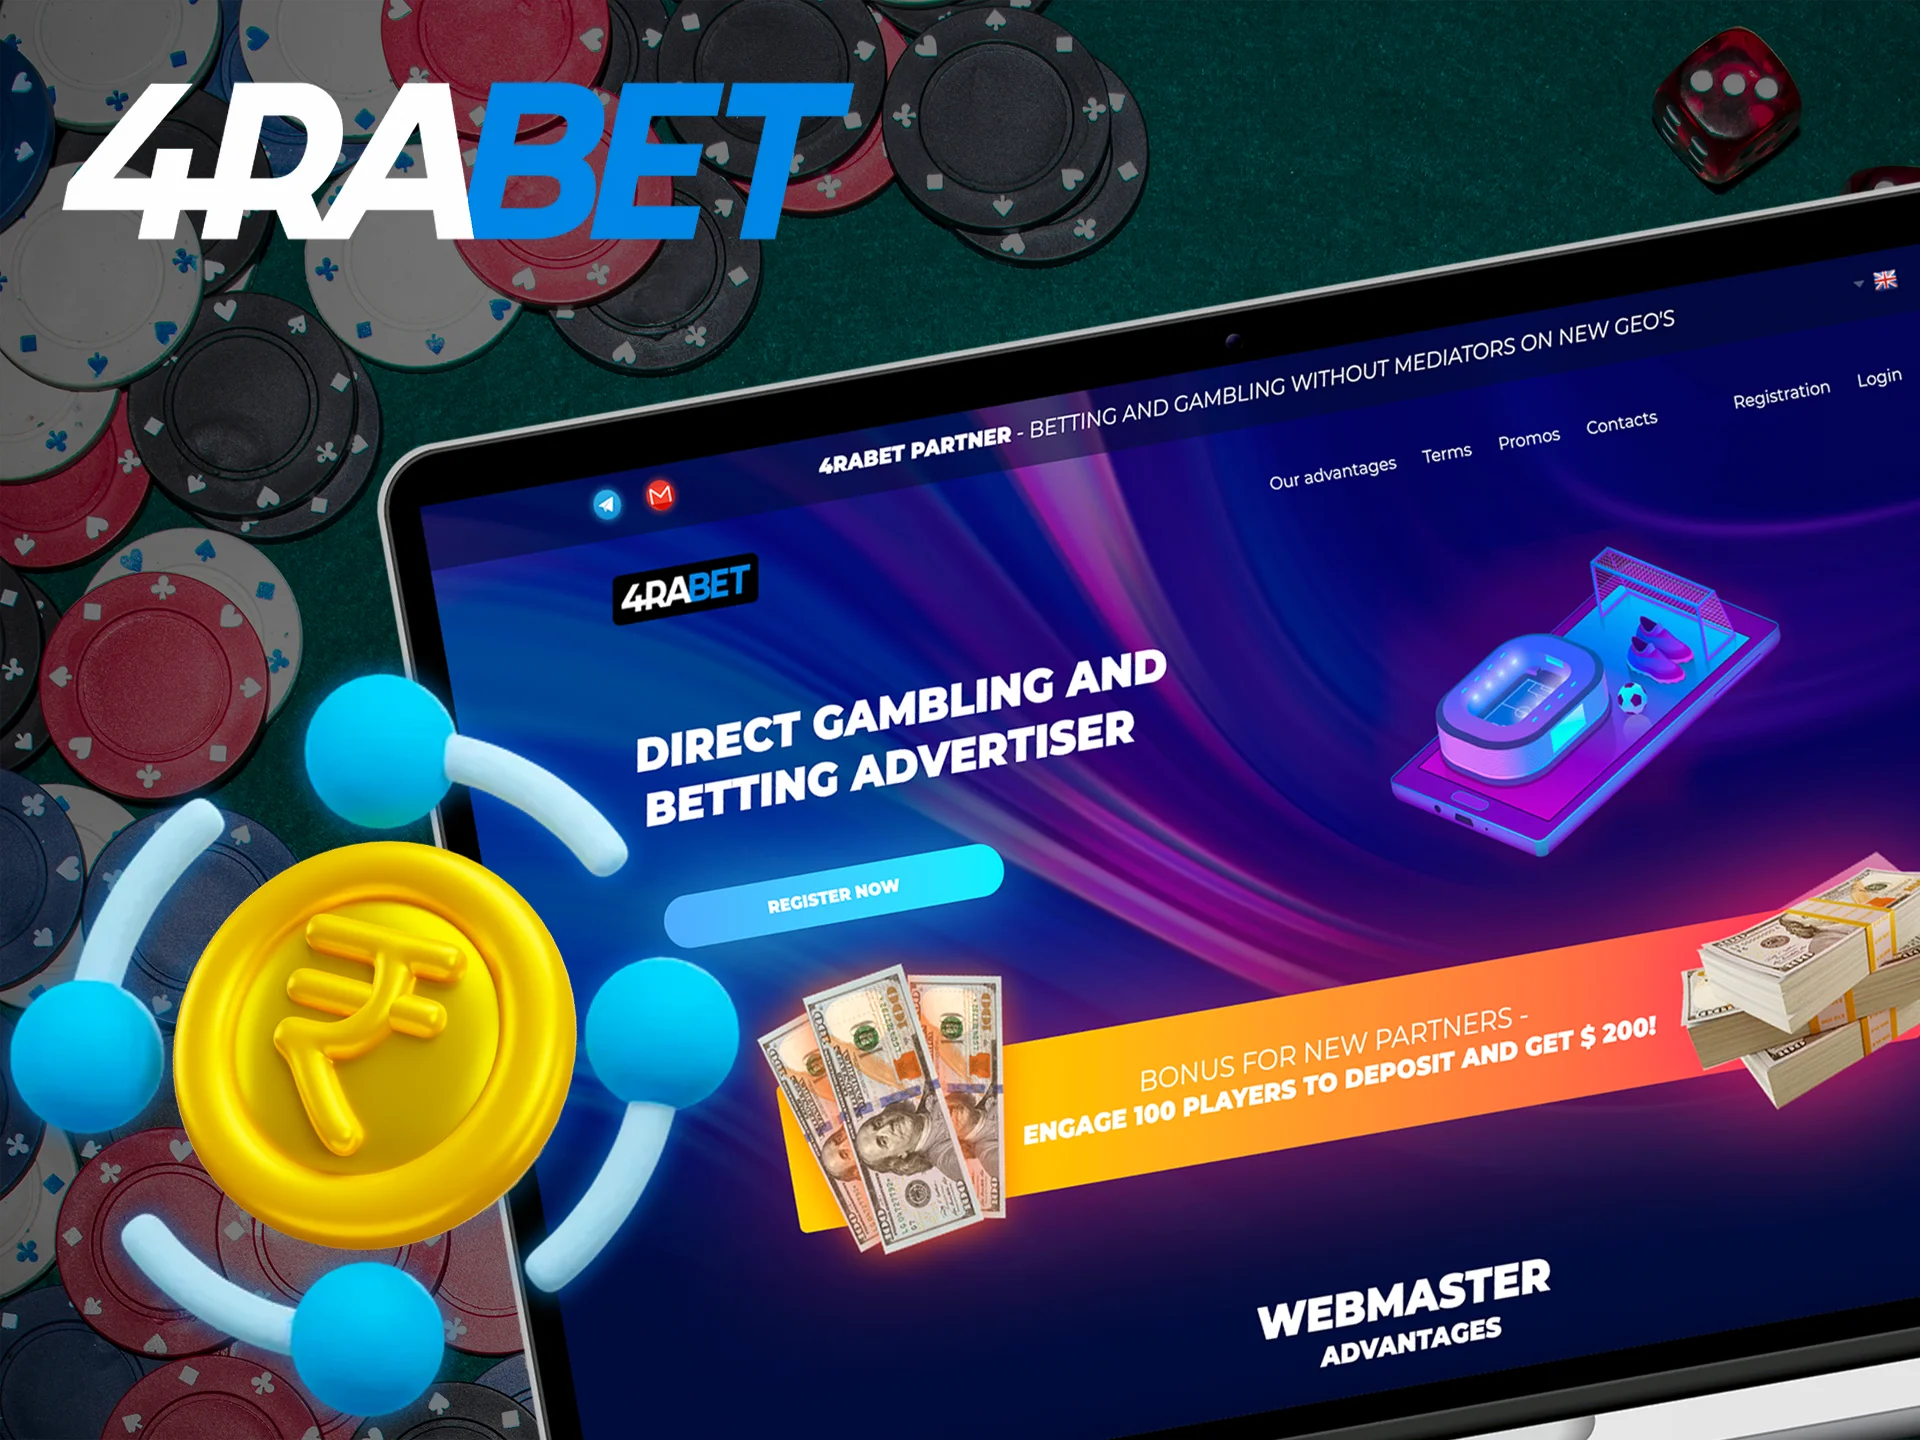 Take advantage of the 4Rabet online casino referral program for Indian players, which allows you to receive additional bonuses.